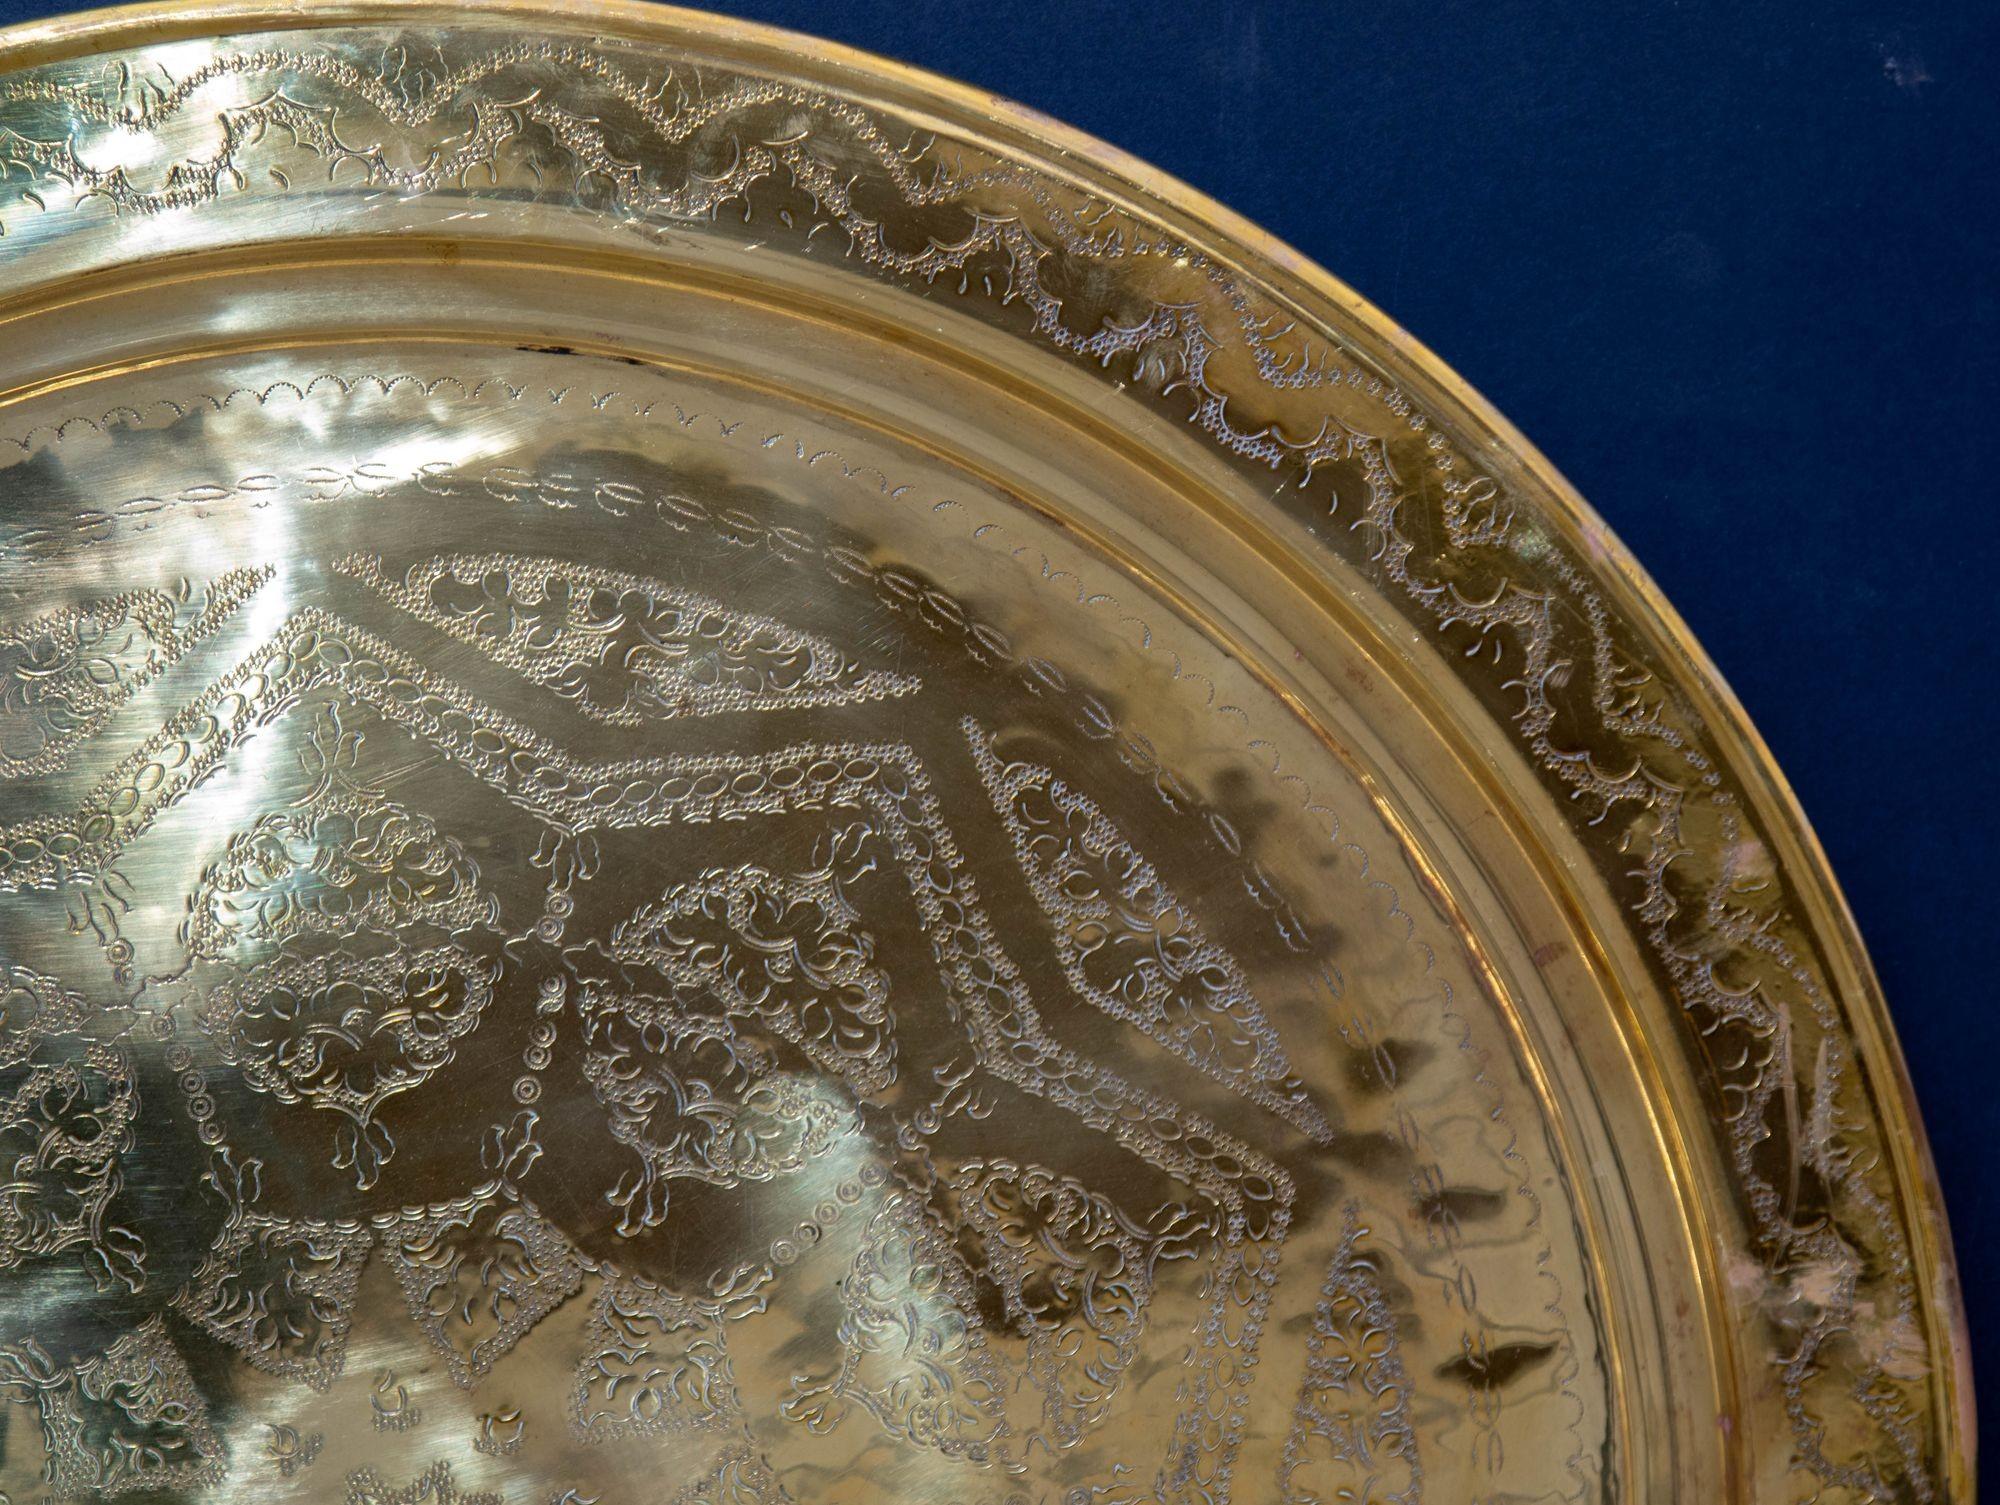 Islamic Antique Oversized Round Moroccan Polished Brass Tray Platter 19th C. For Sale